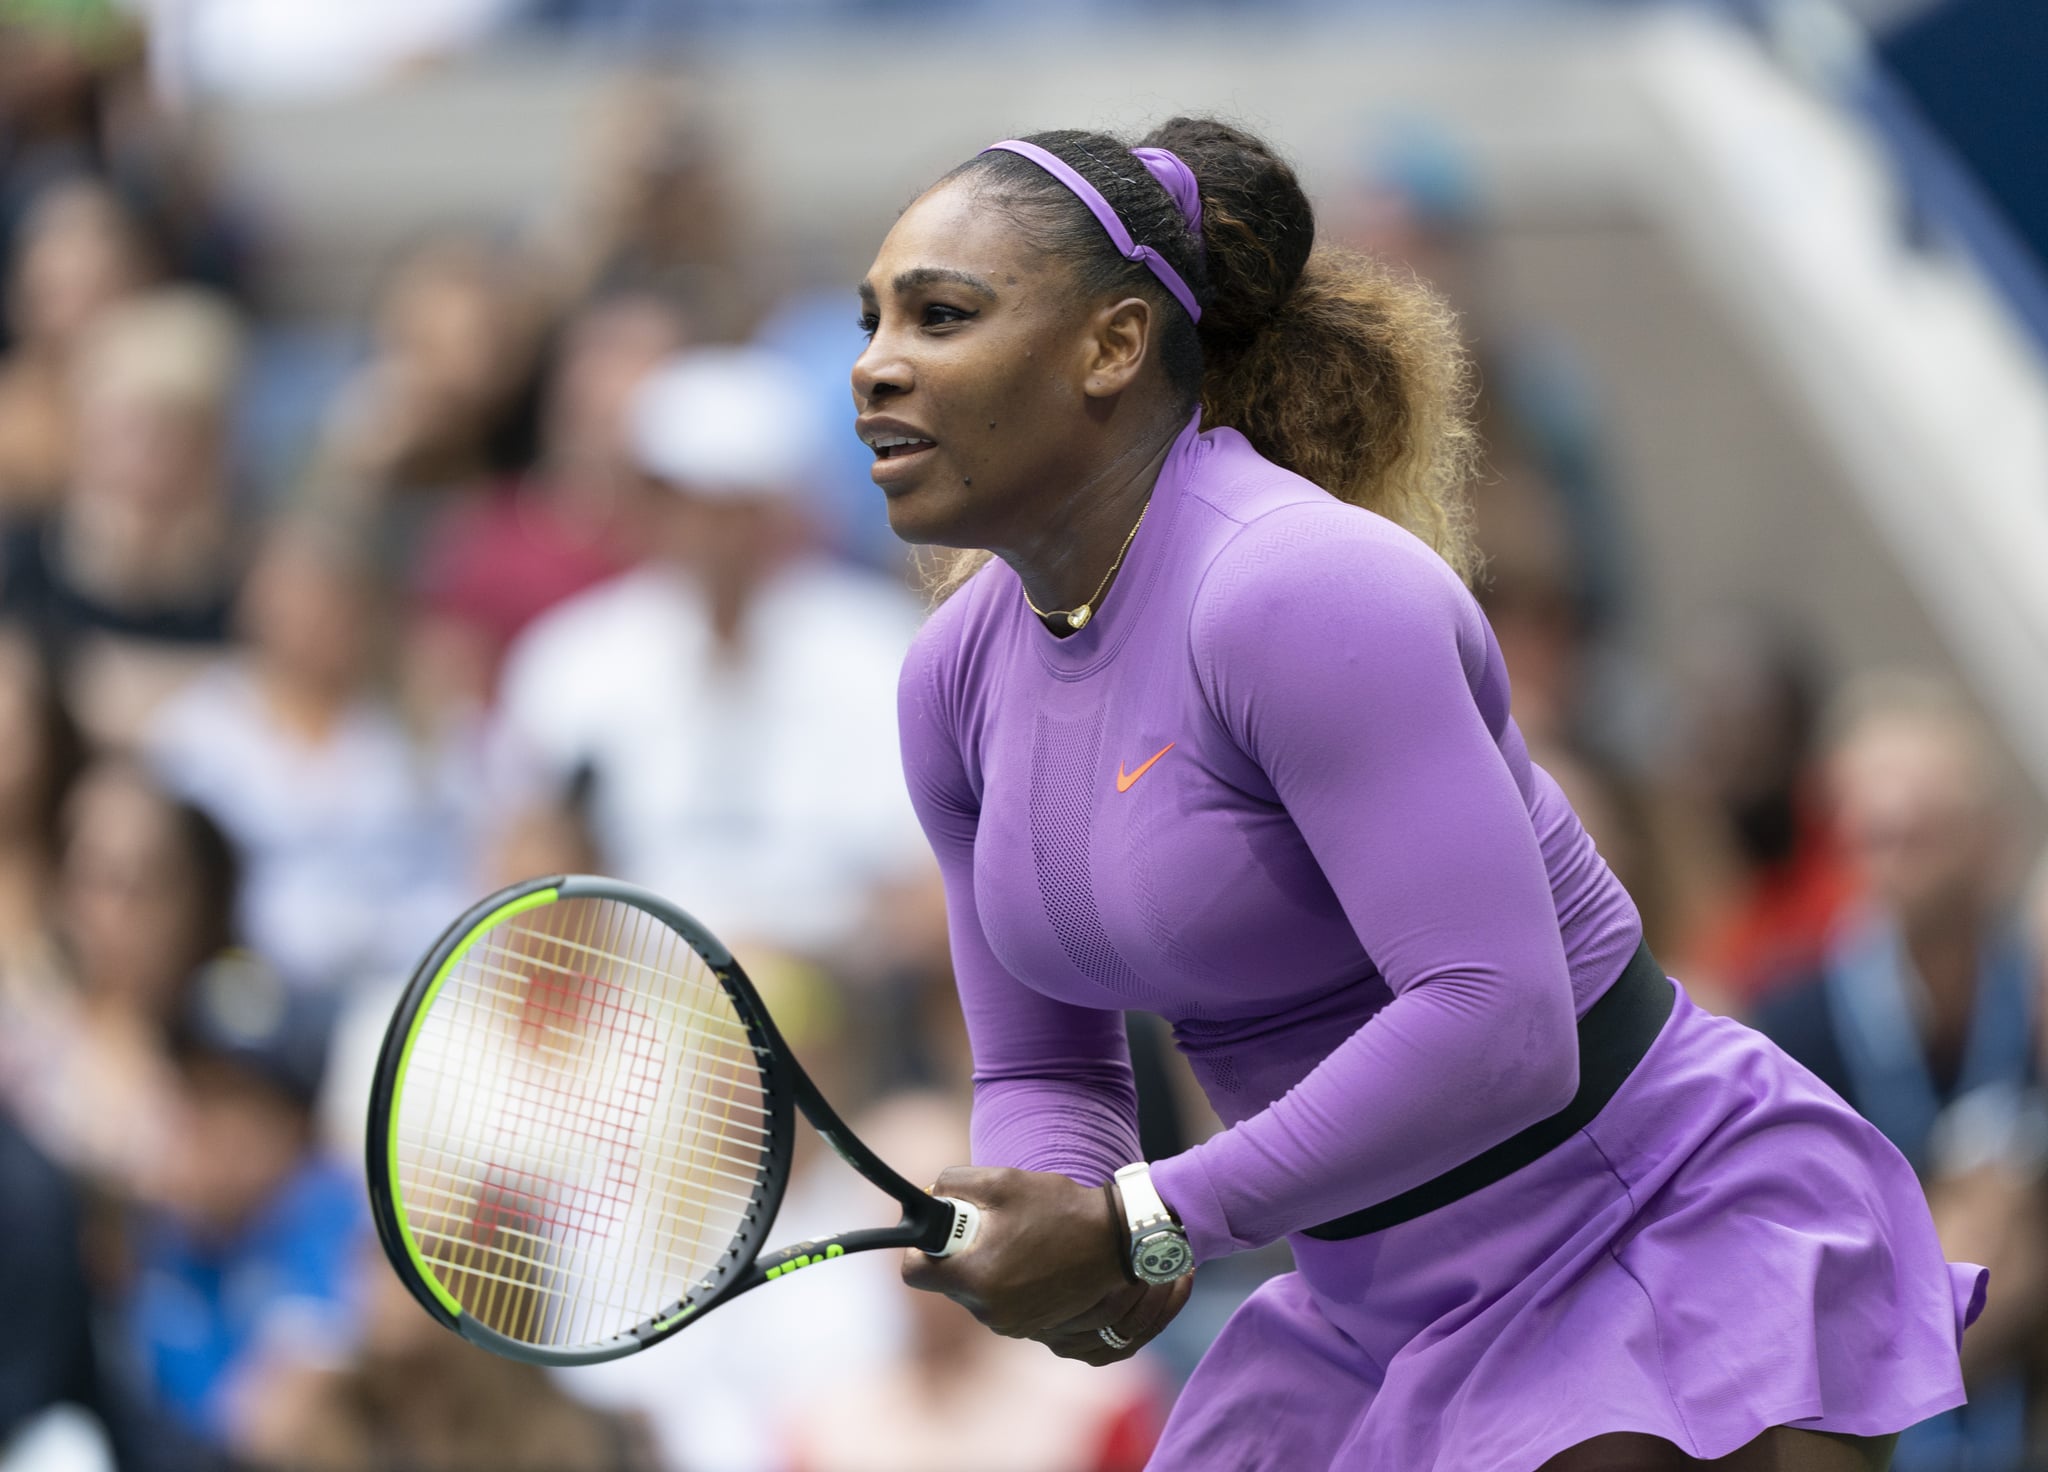 NEW YORK, USA - SEPTEMBER 7: Serena Williams of USA in action against Bianca Andreescu (not seen) of Canada during US Open Championships women's singles final match at Billie Jean King National Tennis Center in New York, United States on September 7, 2019. (Photo by Lev Radin/Anadolu Agency via Getty Images)